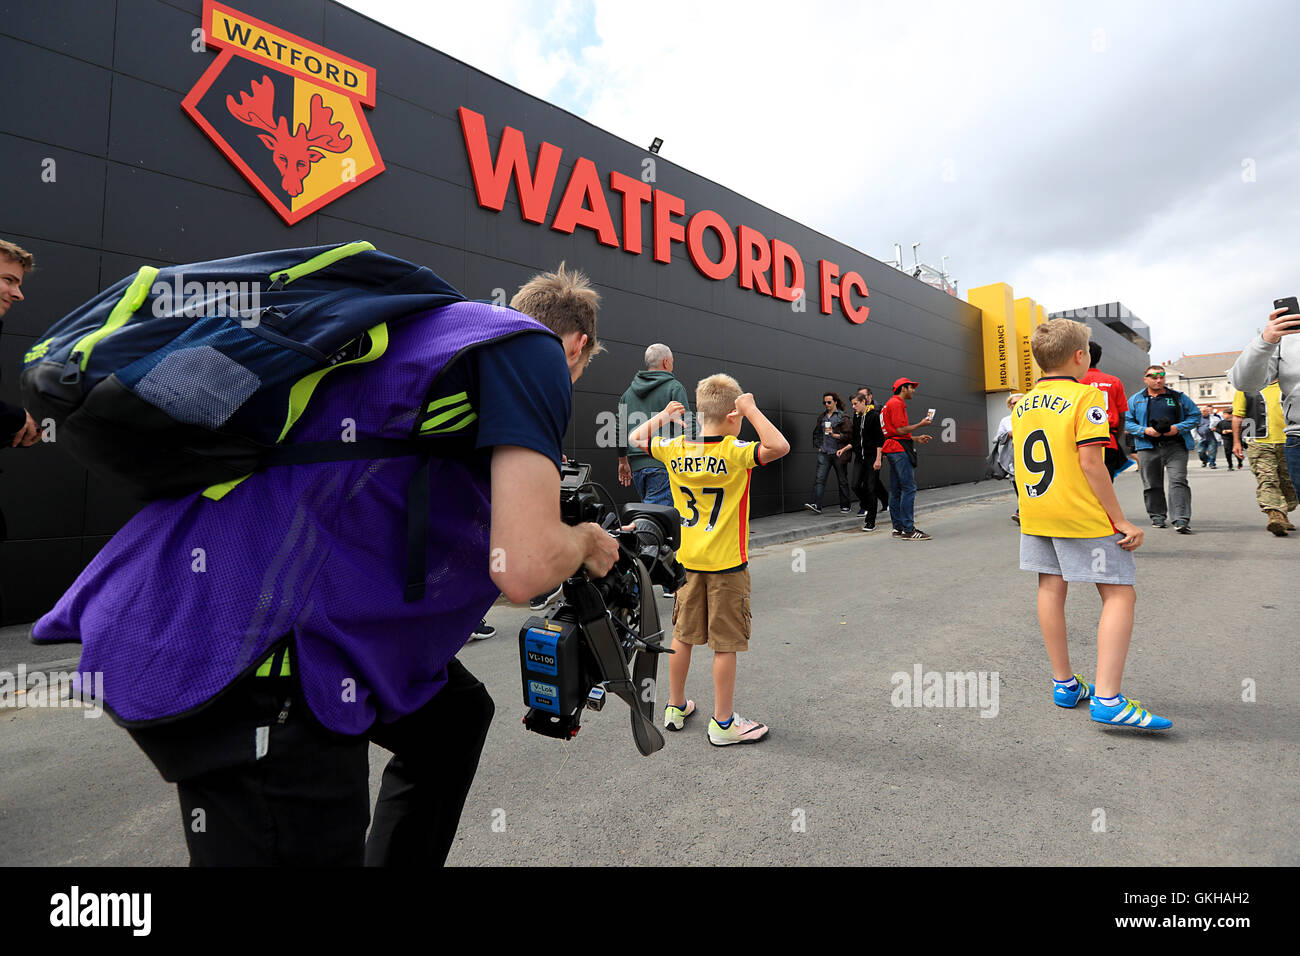 A young Watford fan poses in a Juan Carlos Paredes shirt prior to the Premier League match at Vicarage Road, Watford. PRESS ASSOCIATION Photo. Picture date: Saturday August 20, 2016. See PA story SOCCER Watford. Photo credit should read: John Walton/PA Wire. RESTRICTIONS: EDITORIAL USE ONLY No use with unauthorised audio, video, data, fixture lists, club/league logos or 'live' services. Online in-match use limited to 75 images, no video emulation. No use in betting, games or single club/league/player publications. Stock Photo